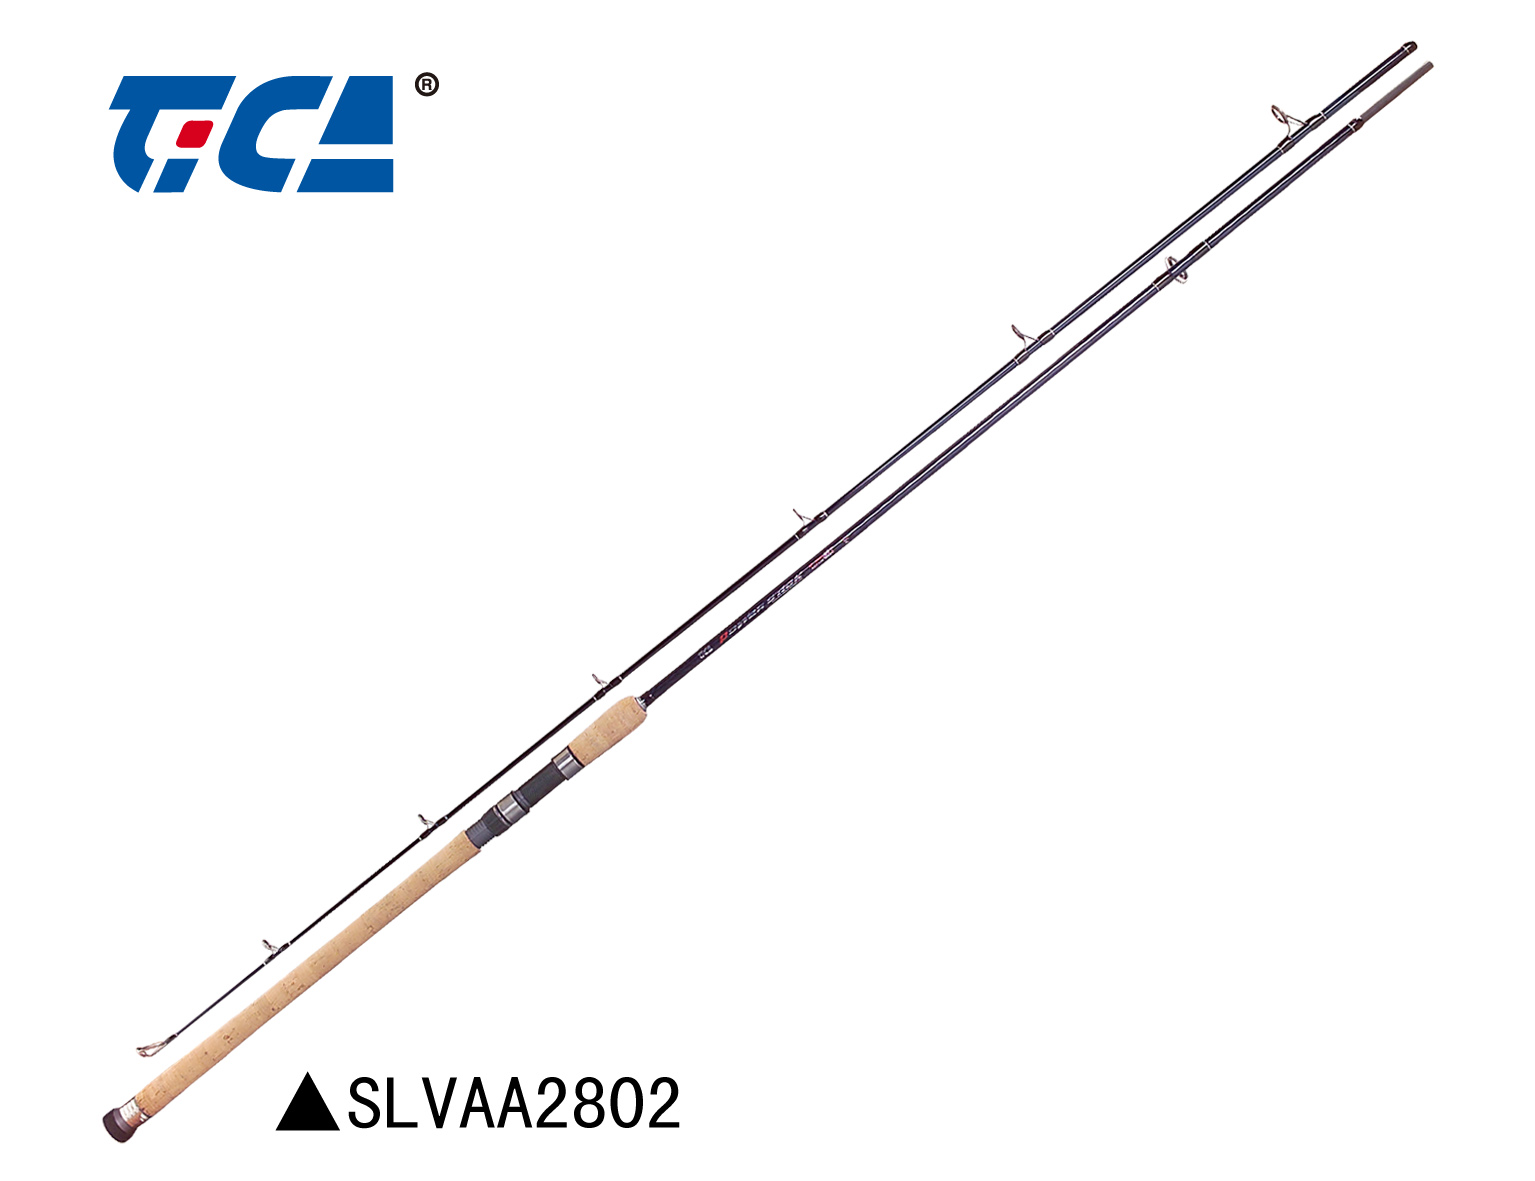 POWER-STICK  Tica Fishing Tackle